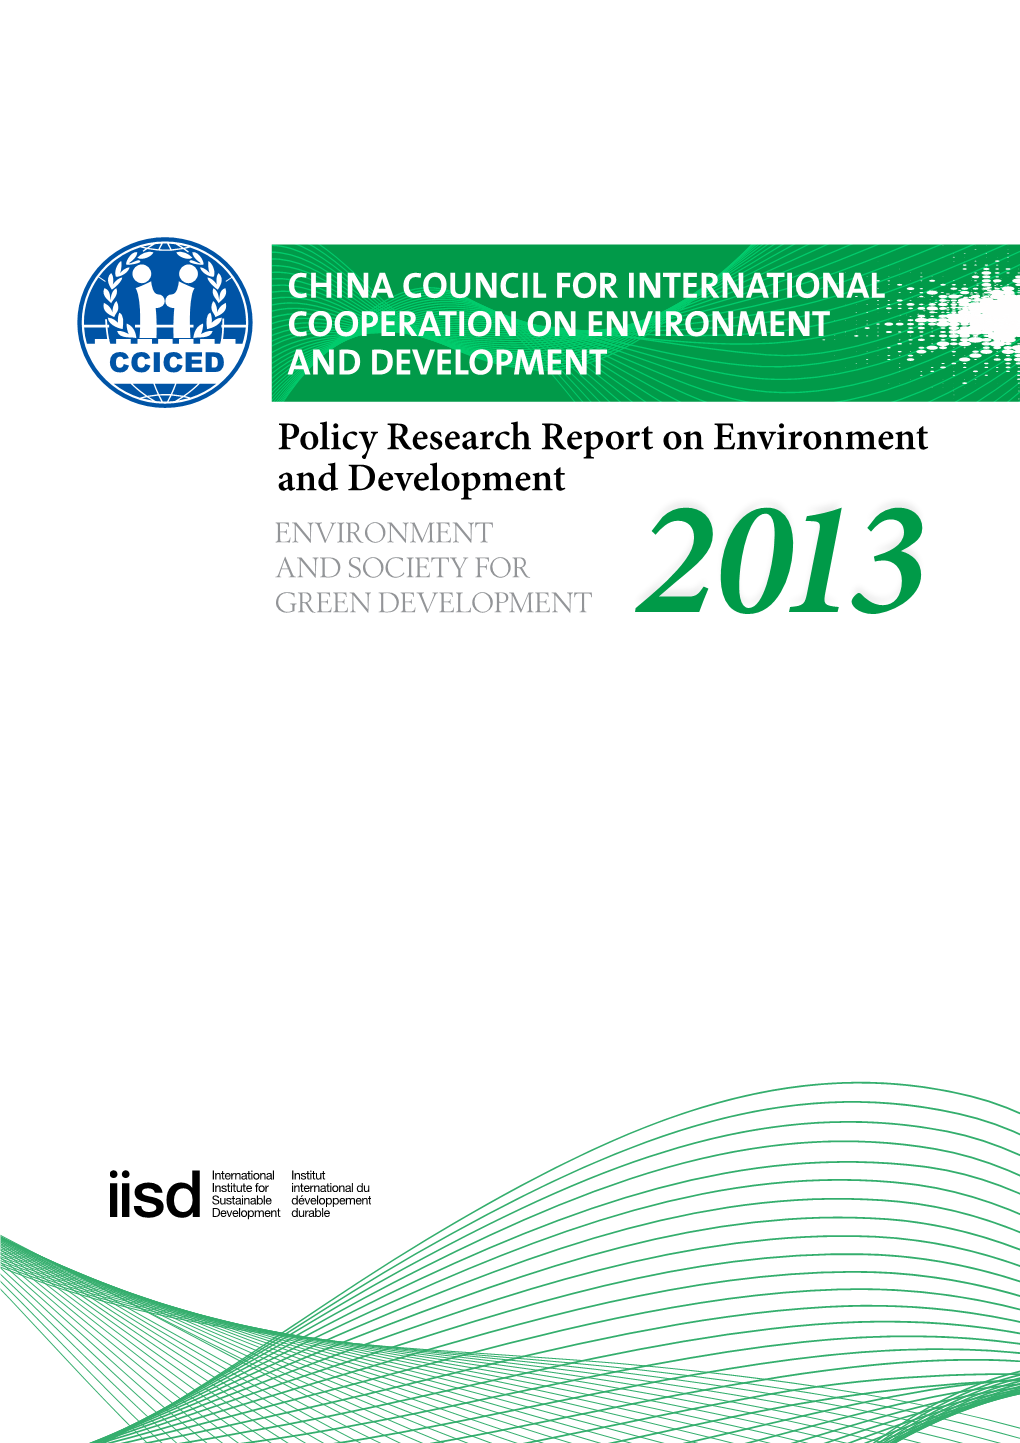 Policy Research Report of Environment and Development 2013